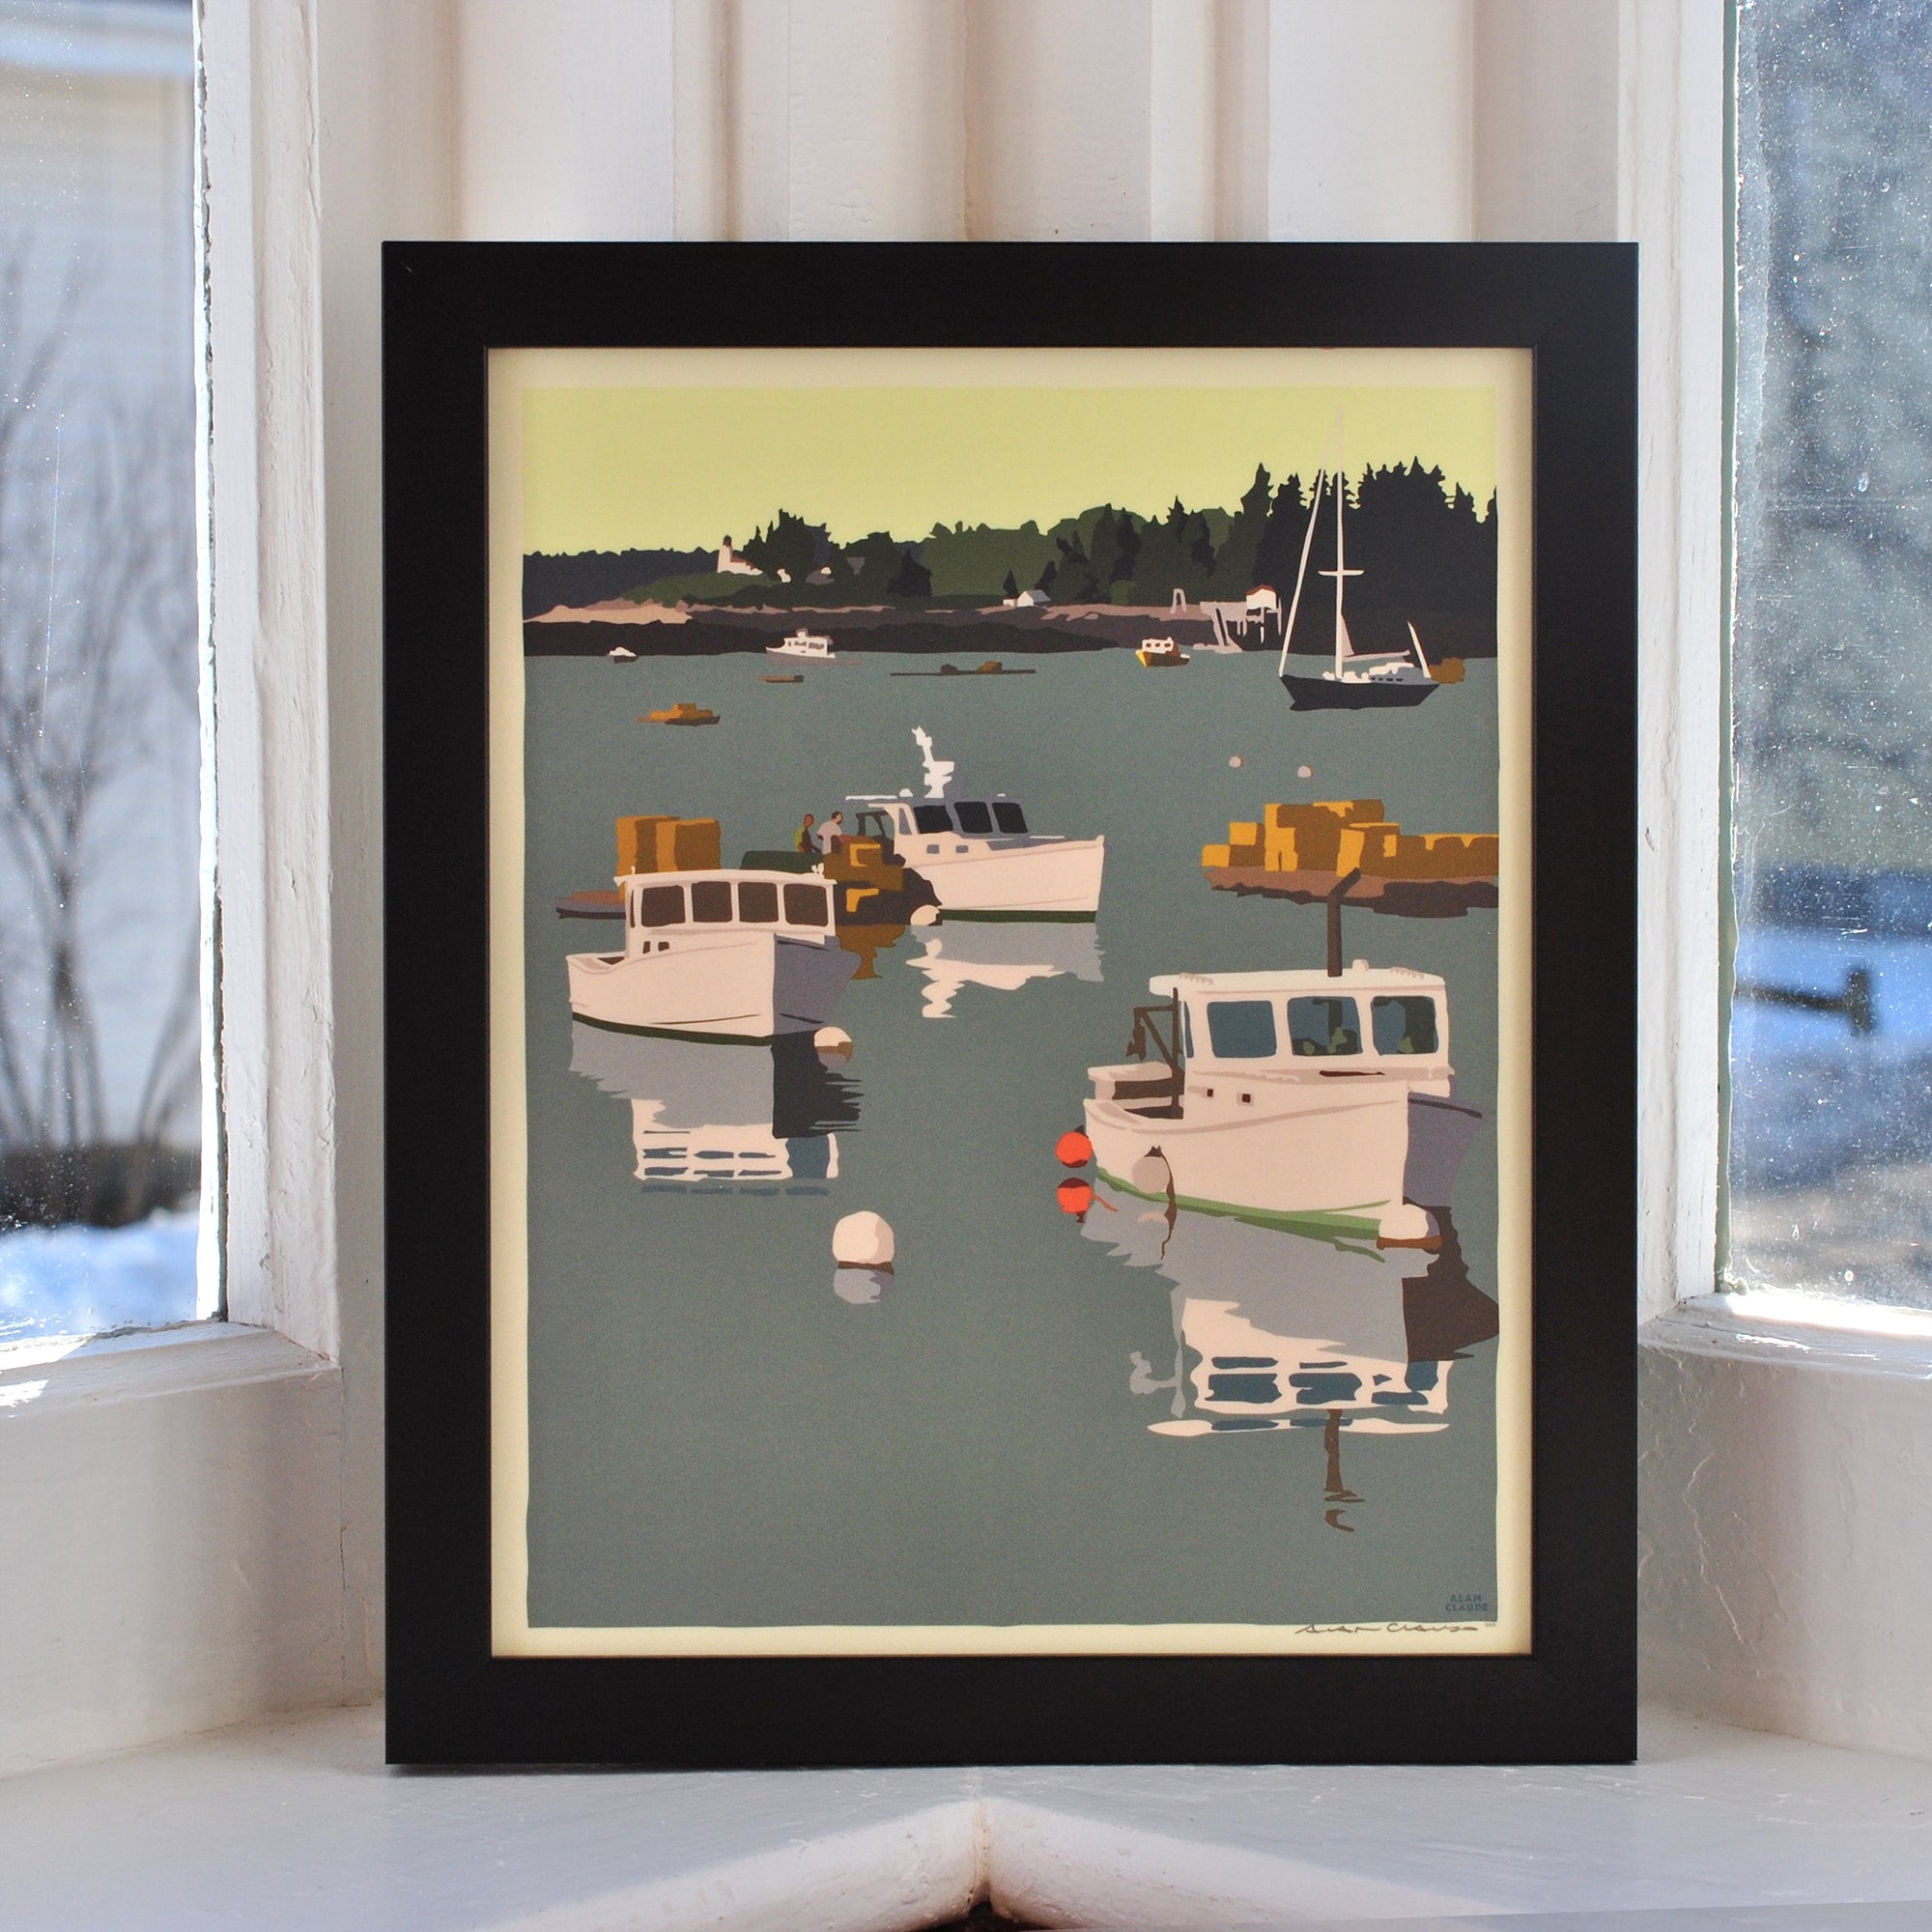 Lobster Boats on a Sunday Morning Art Print 8" x 10" Framed Wall Poster By Alan Claude - Maine